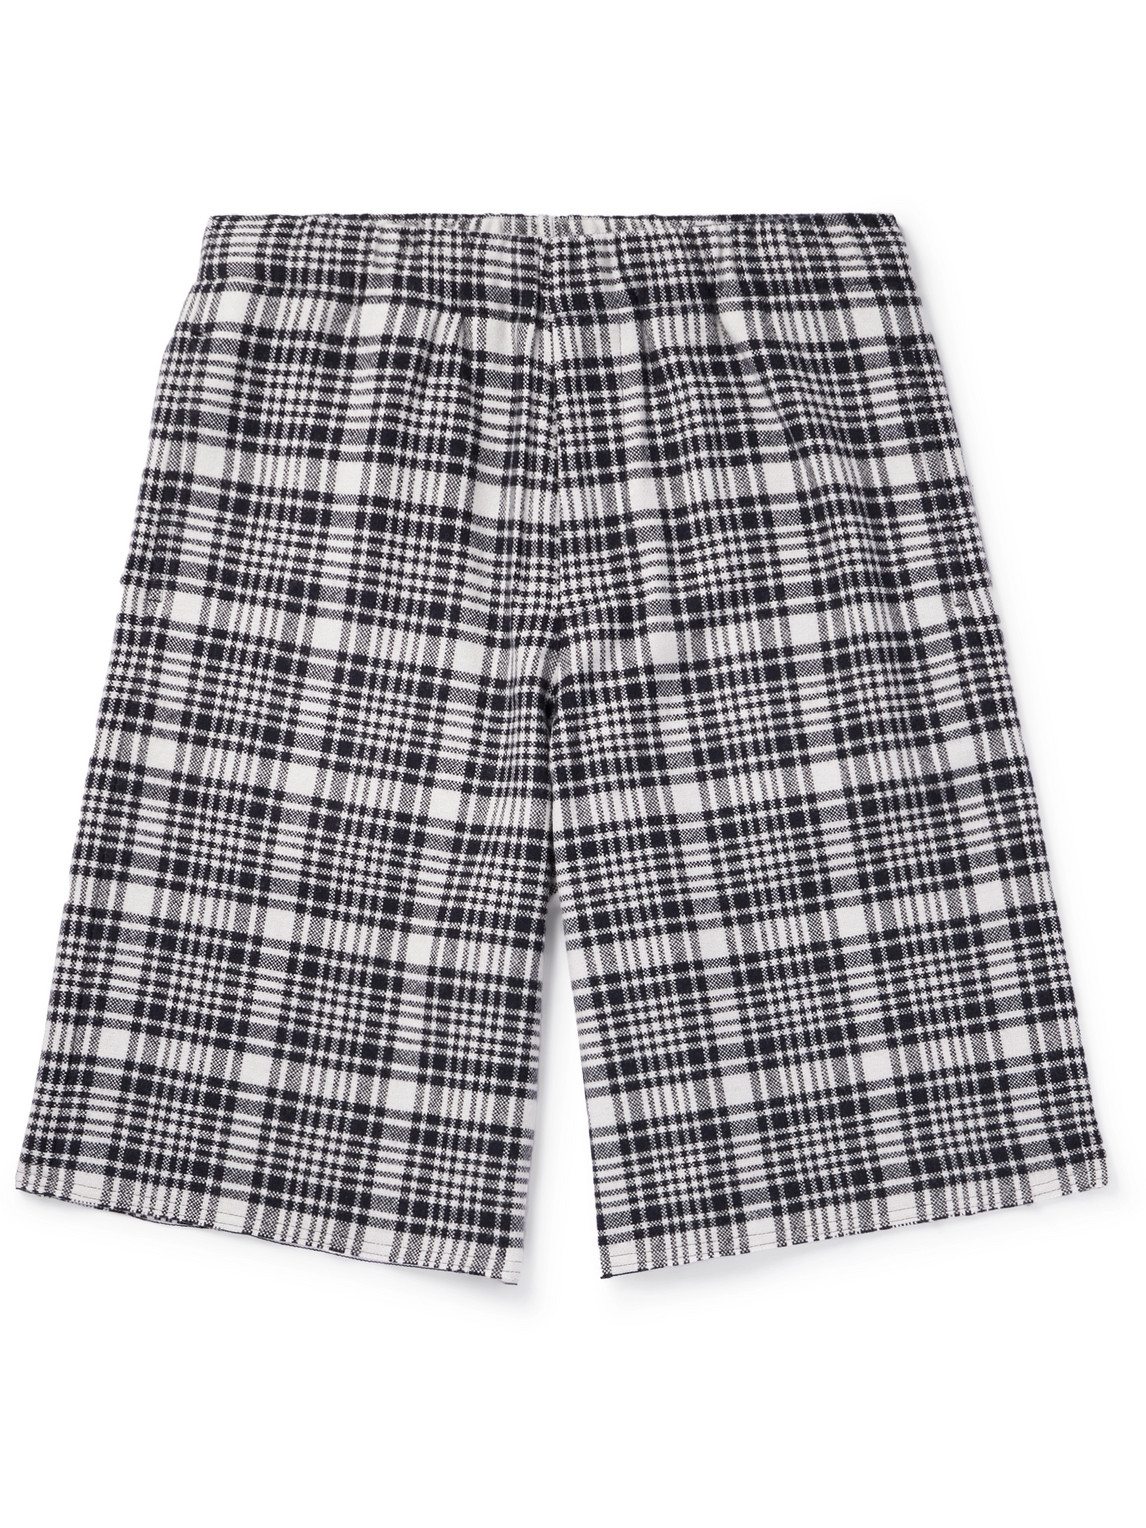 ZEGNA X THE ELDER STATESMAN STRAIGHT-LEG CHECKED WOOL AND CASHMERE-BLEND SHORTS